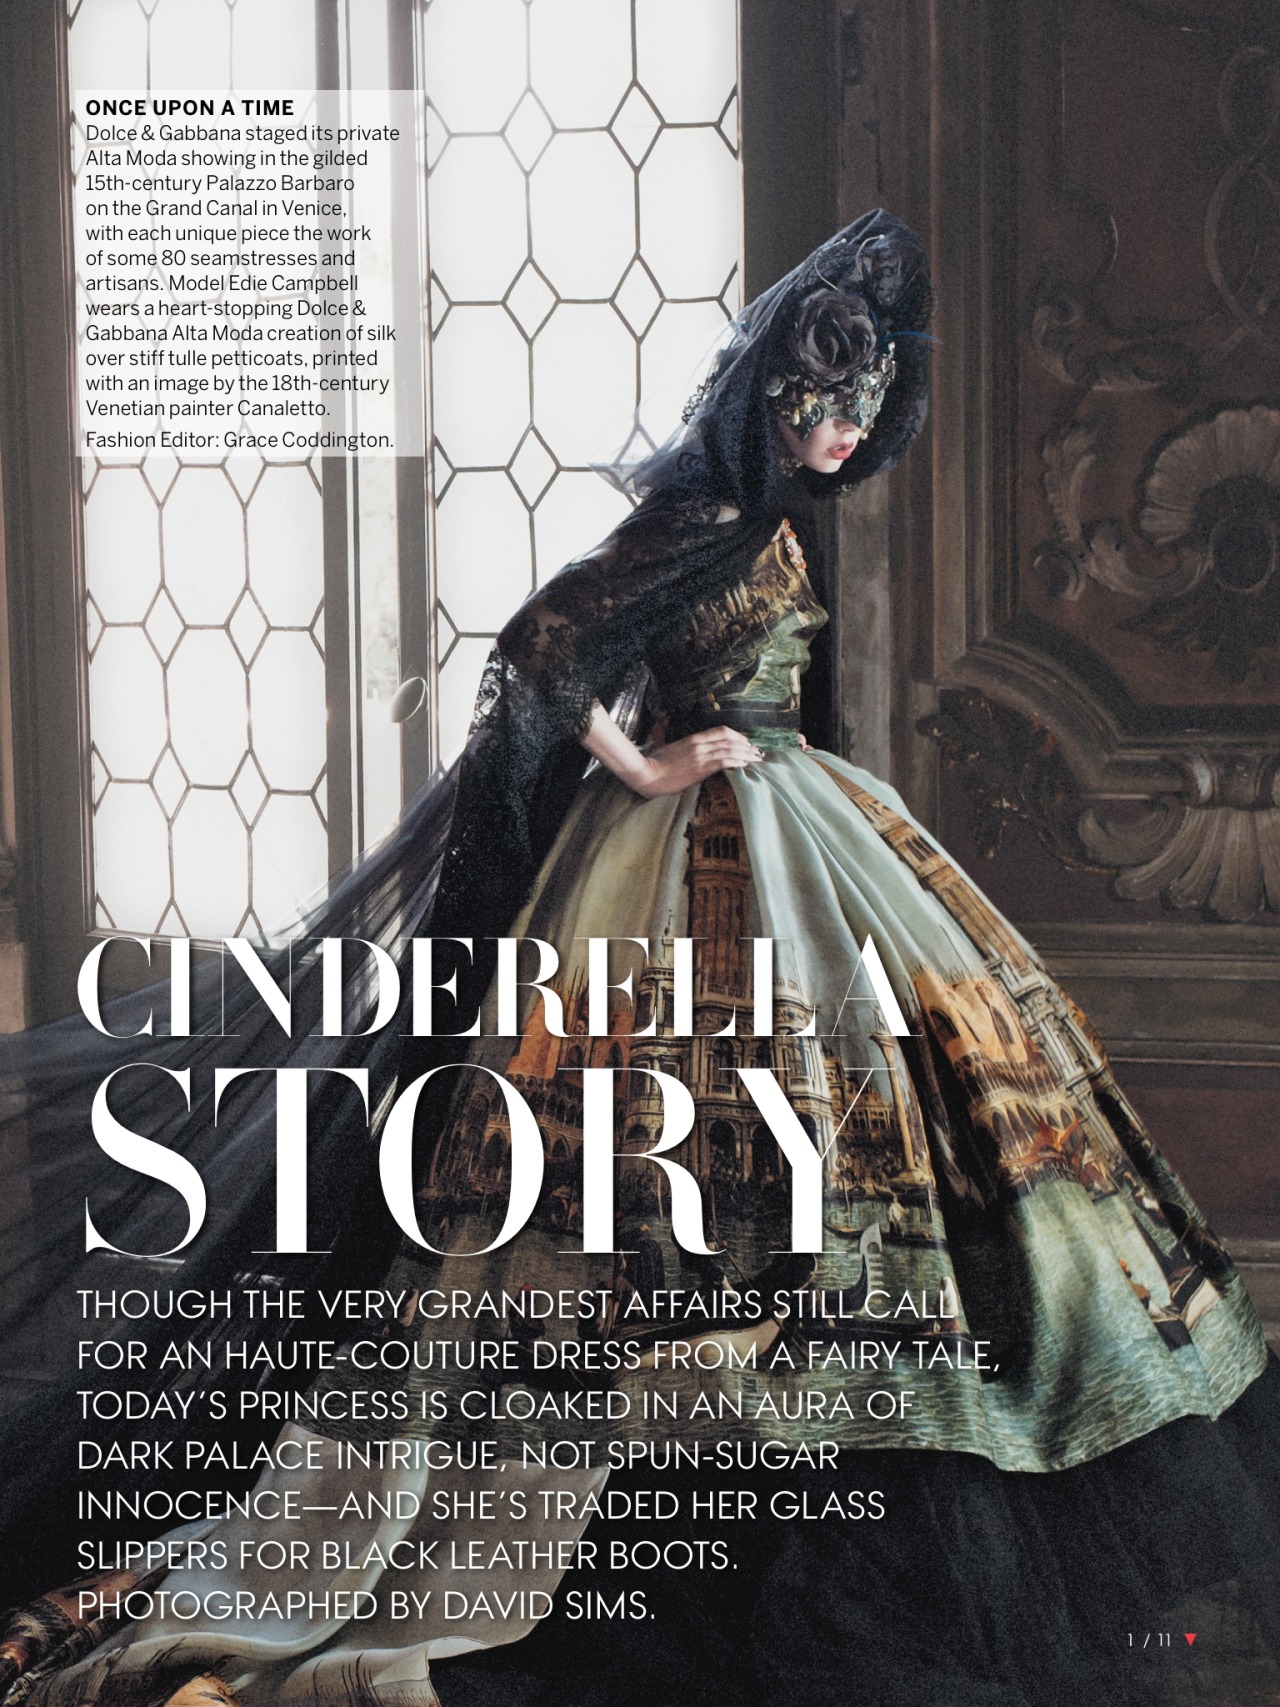 Song of Myself — Cinderella Story Edie Campbell photographed by...